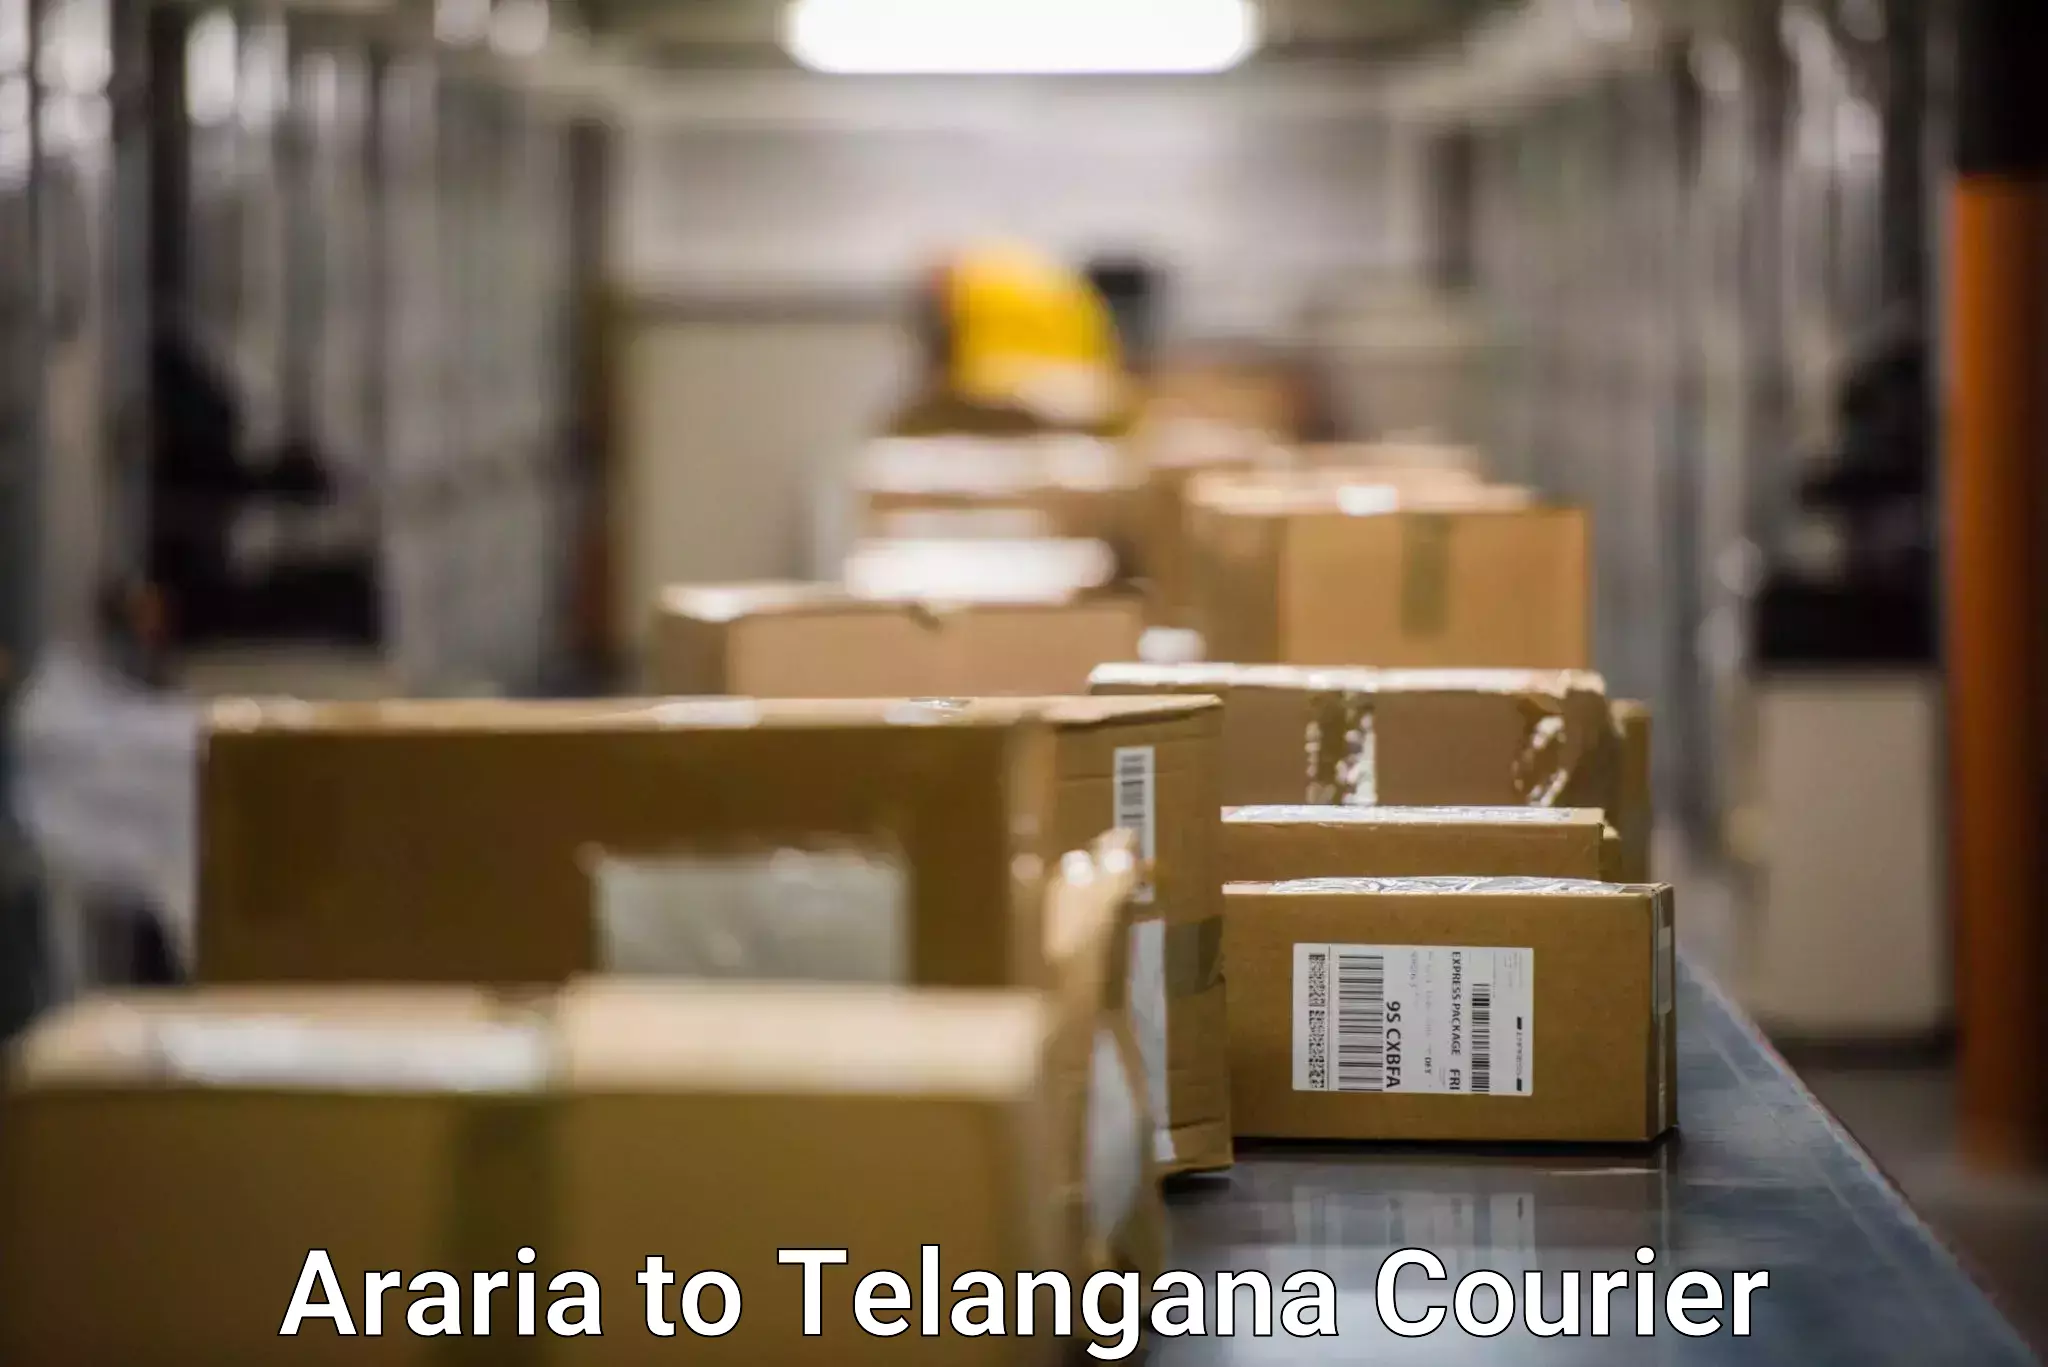 State-of-the-art courier technology Araria to Adilabad